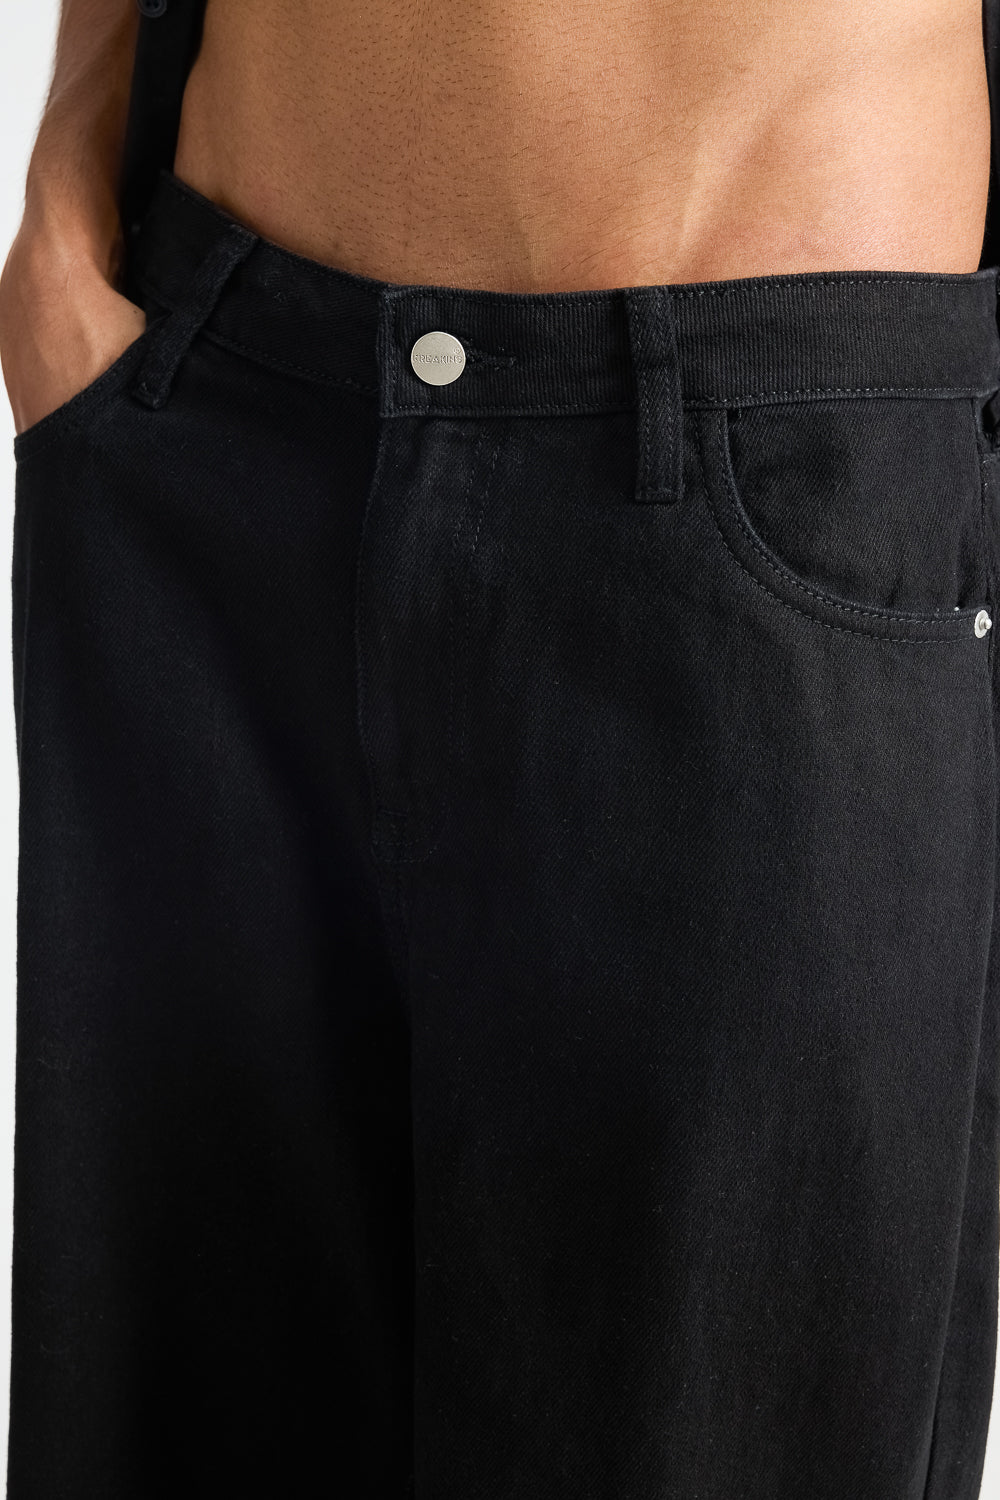 WIDE COAL WASHED MENS JEANS